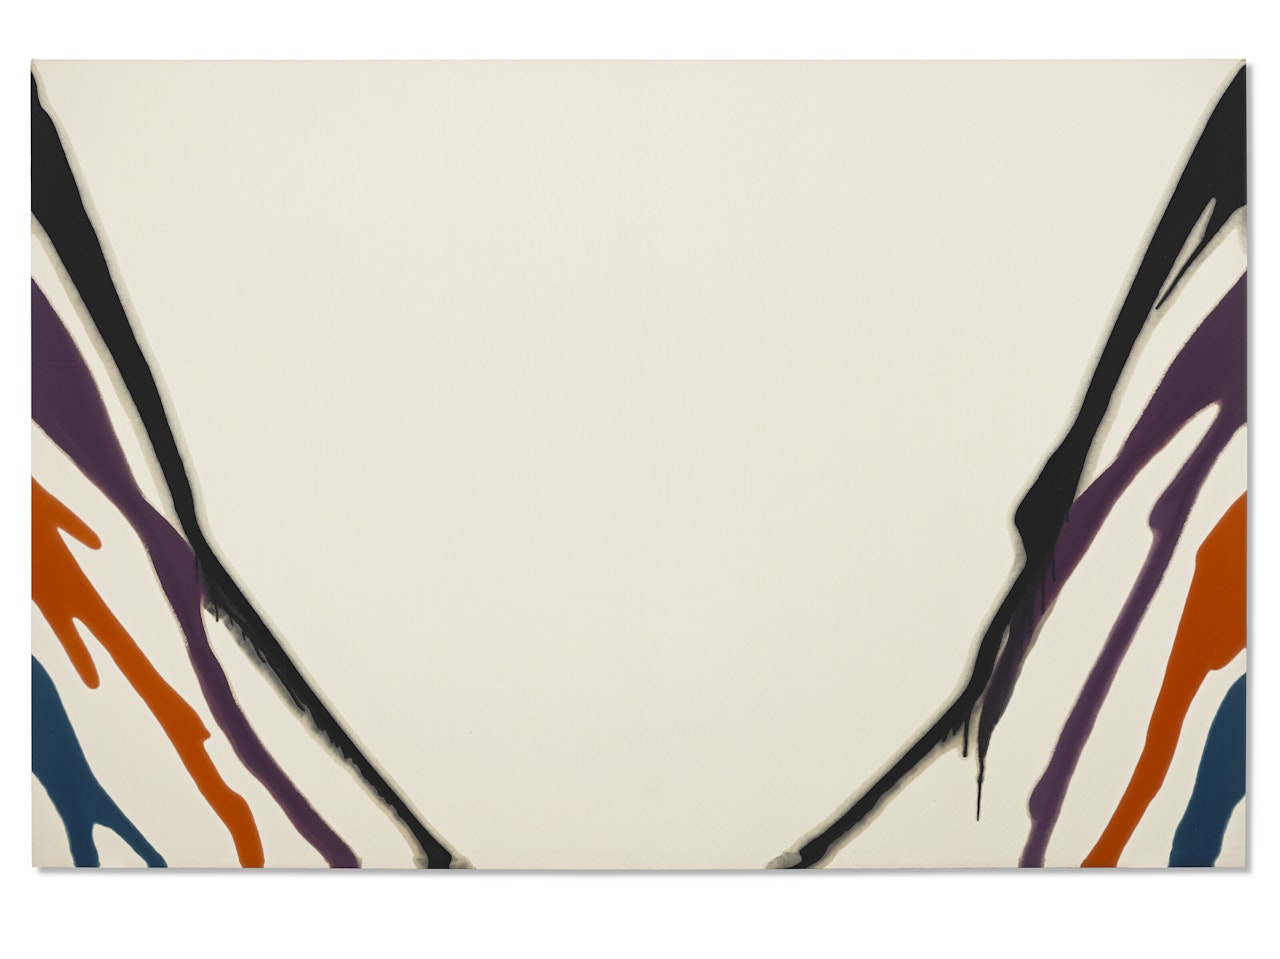 Untitled by Morris Louis